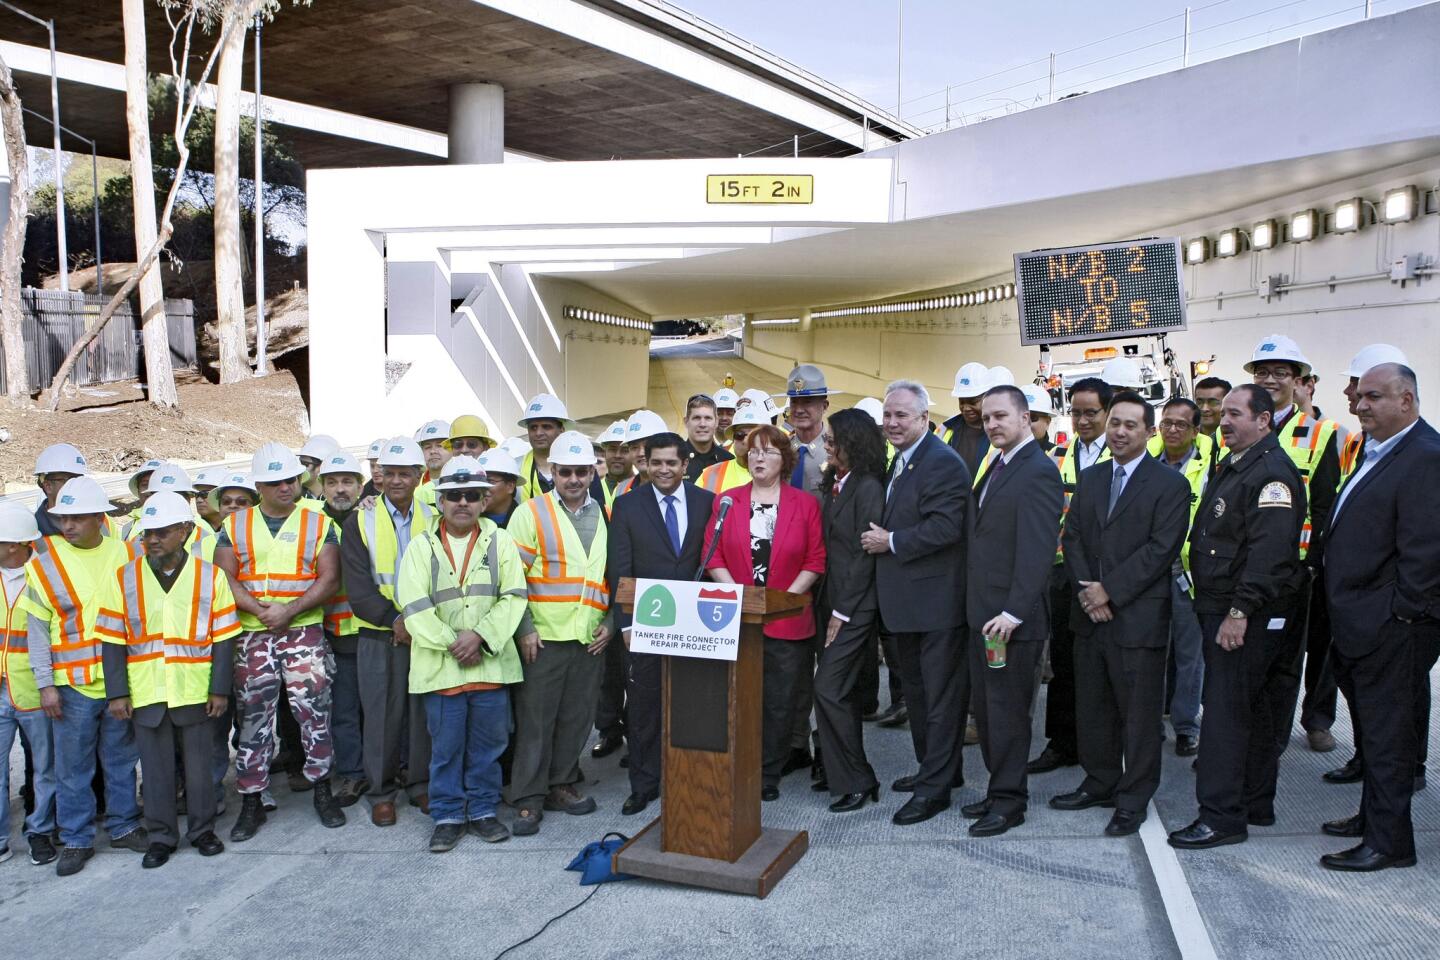 Photo Gallery: Northbound Glendale Fwy (2)/Golden State Fwy (5) connector opens